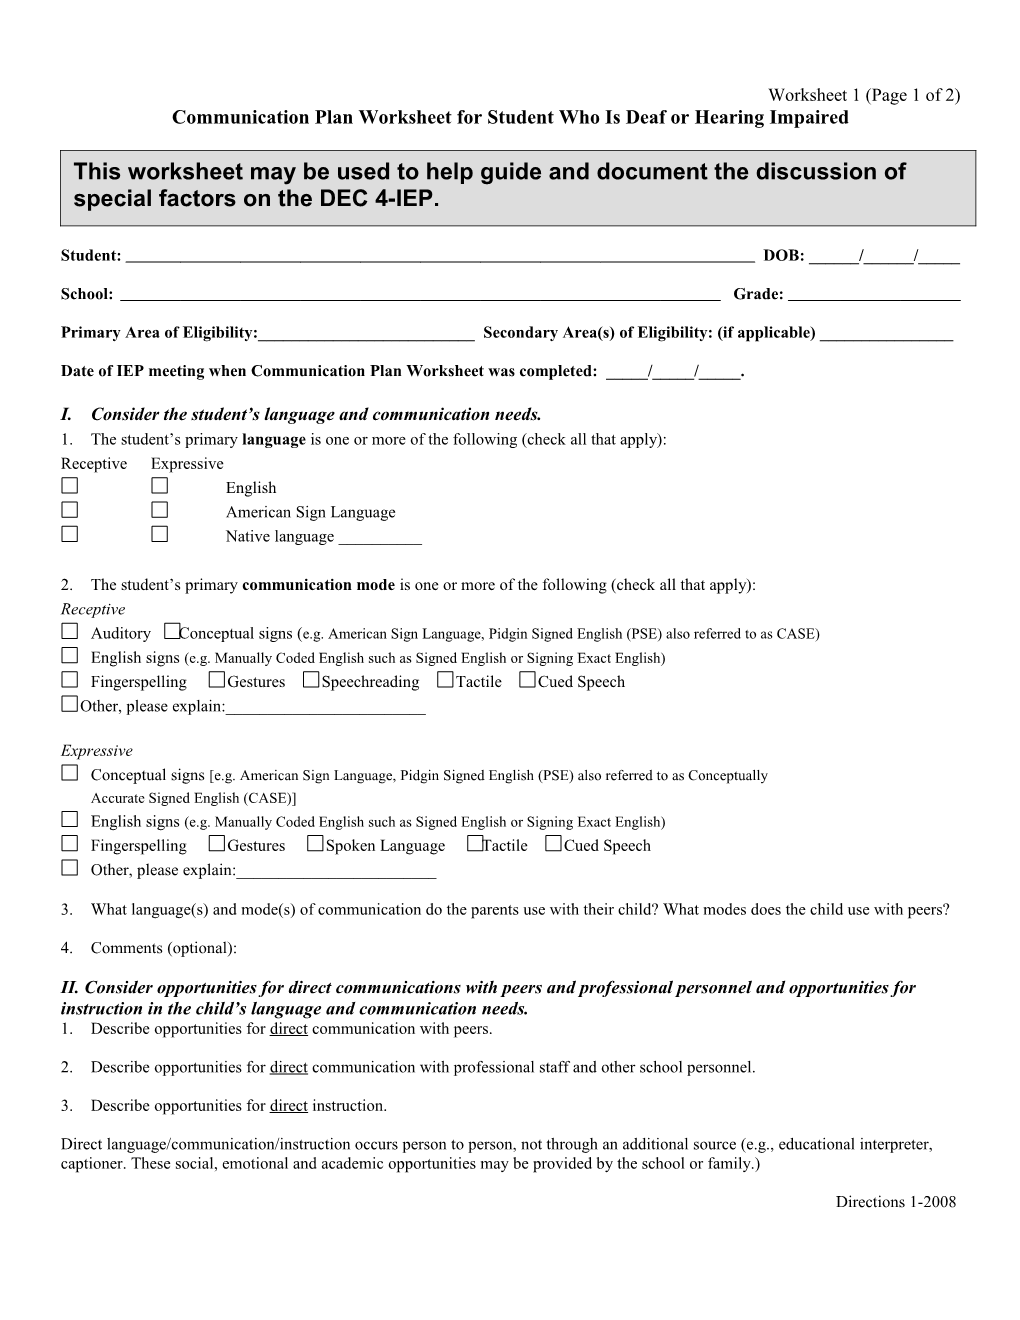 Communication Plan Worksheet for Student Who Is Deaf Or Hearing Impaired